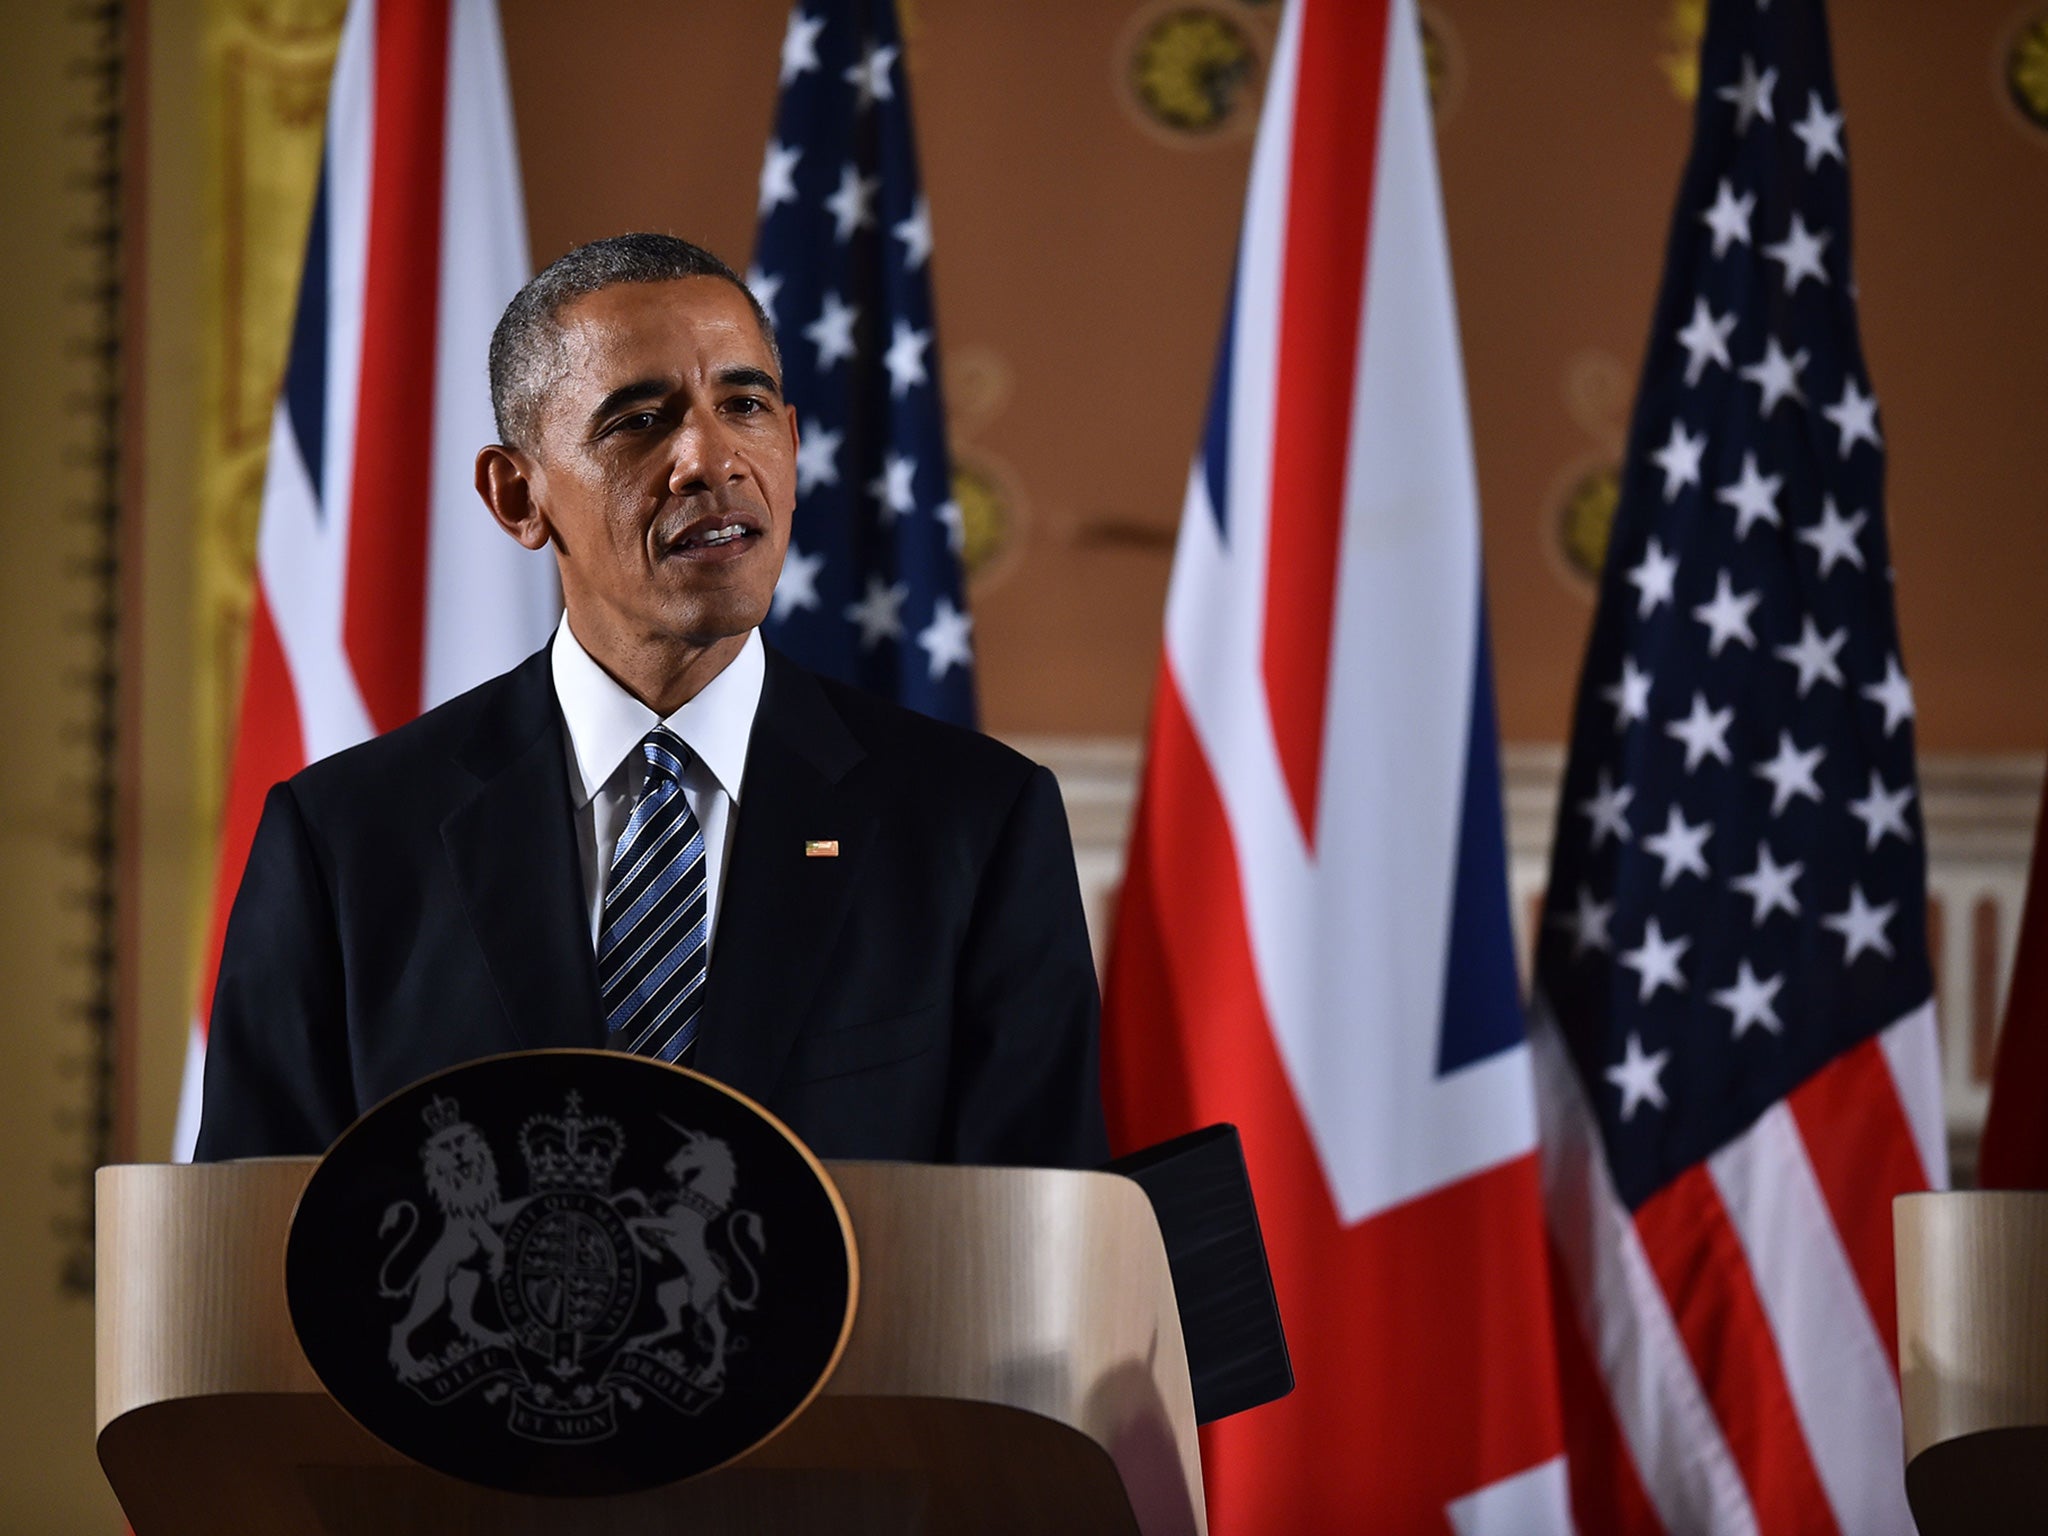 President Obama speaking at a press conference at the Foreign and Commonwealth Office - he said the UK was best when helping to lead a strong Europe